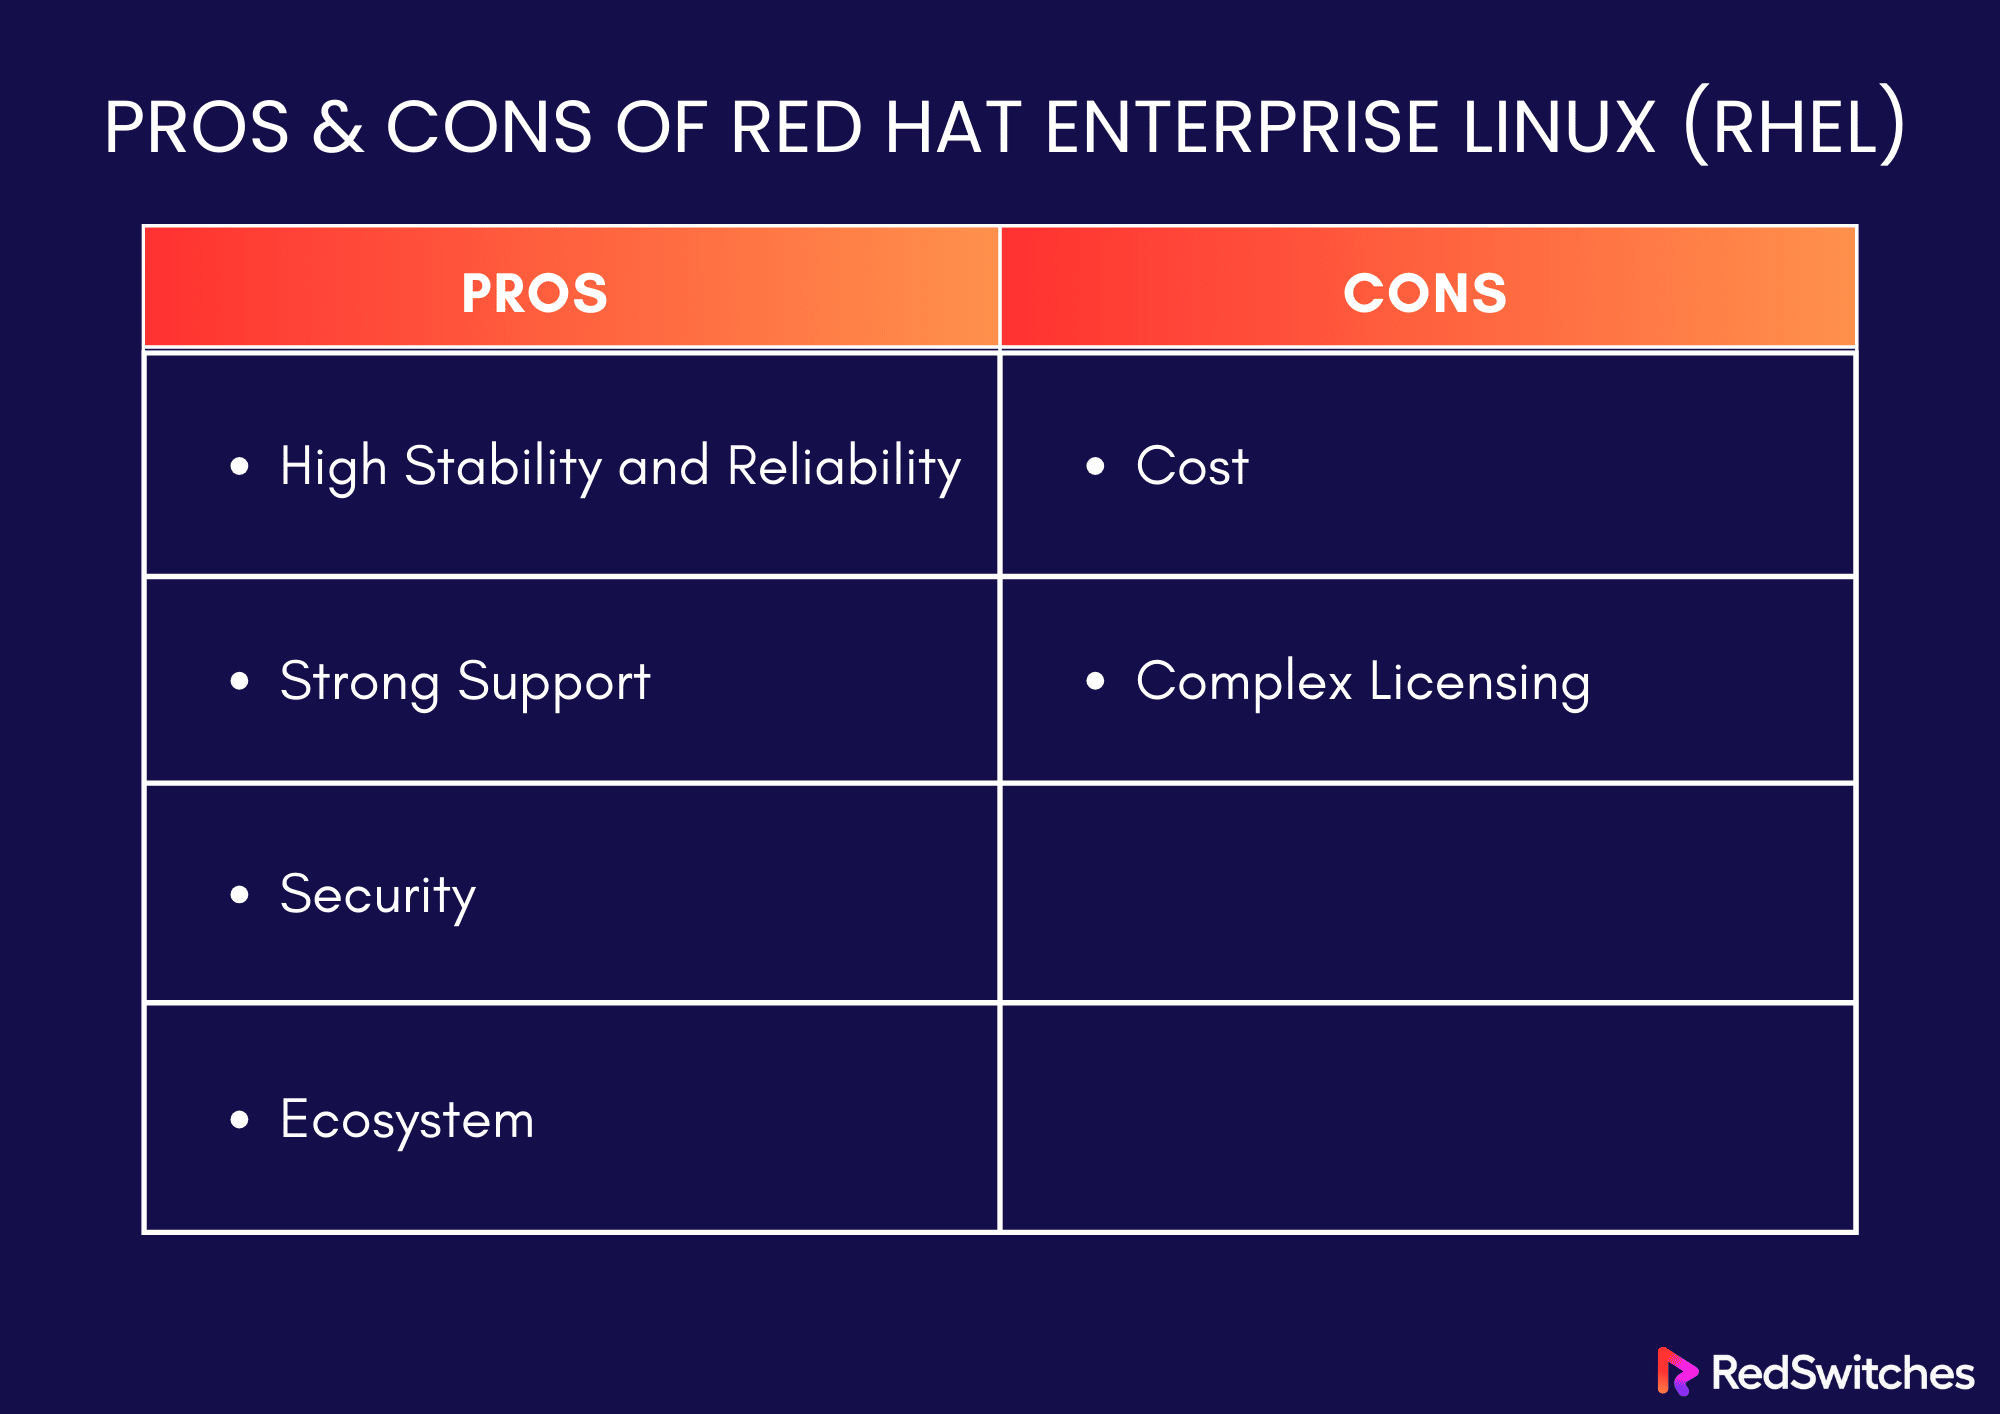 Pros and Cons of Red Hat Enterprise Linux (RHEL)